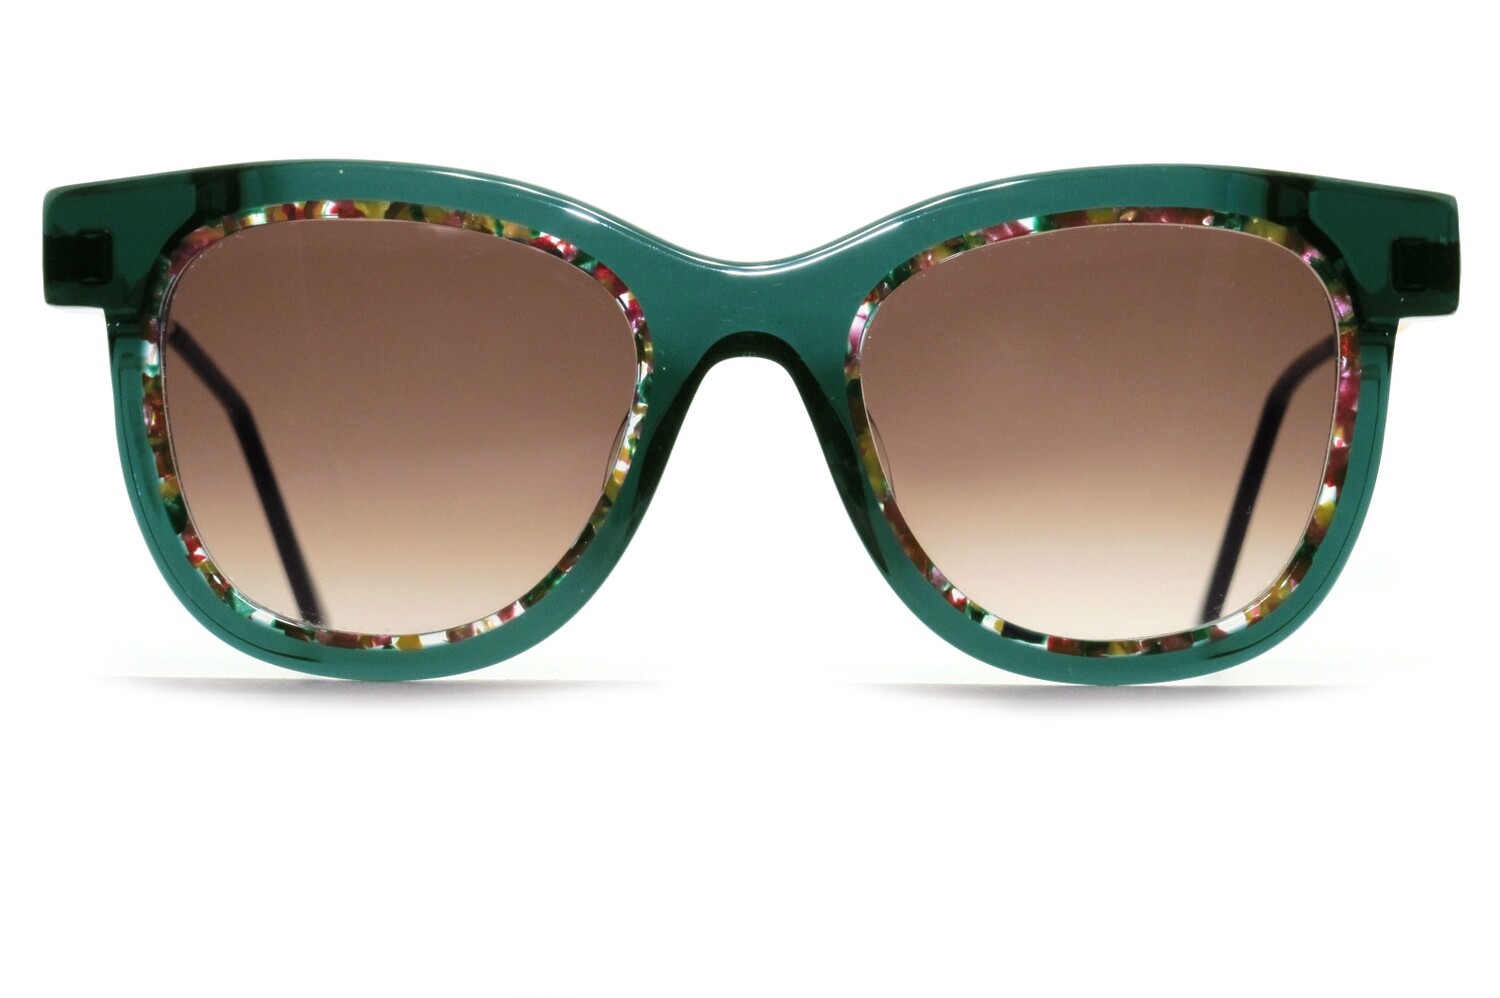 Savvvy by Thierry Lasry